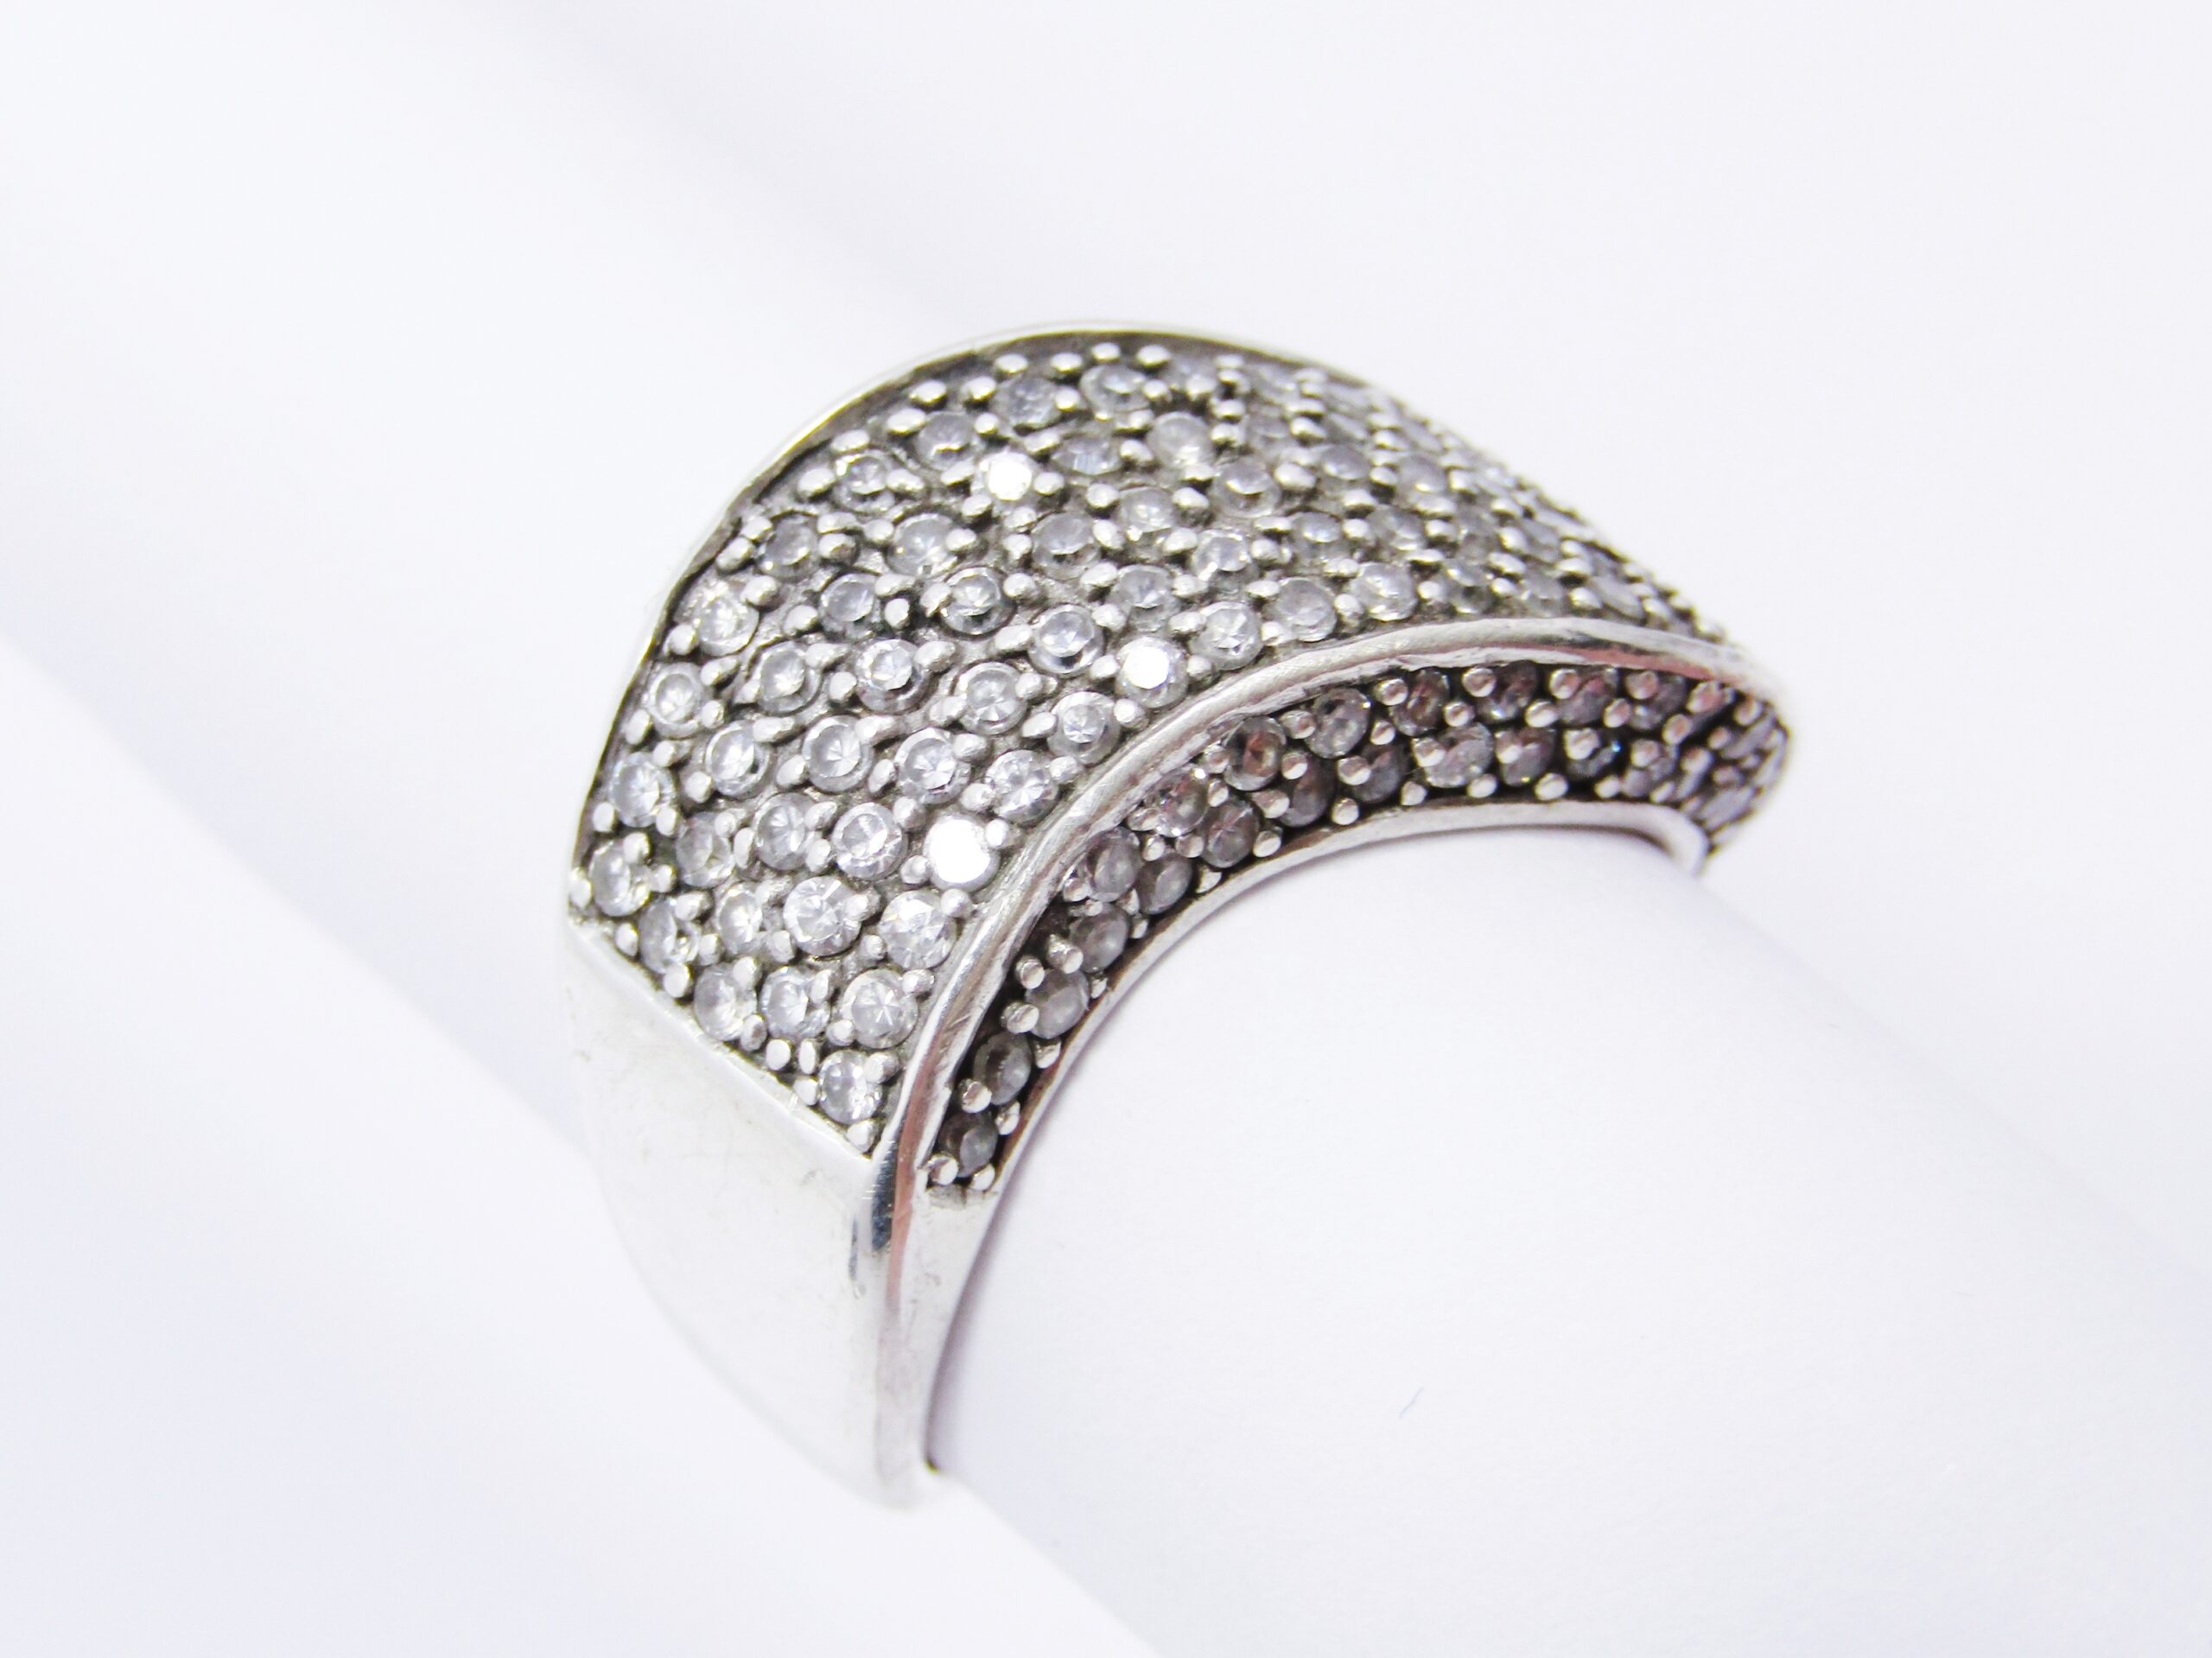 A Lovely Pave Set Clear Zirconia Ring in Sterling Silver